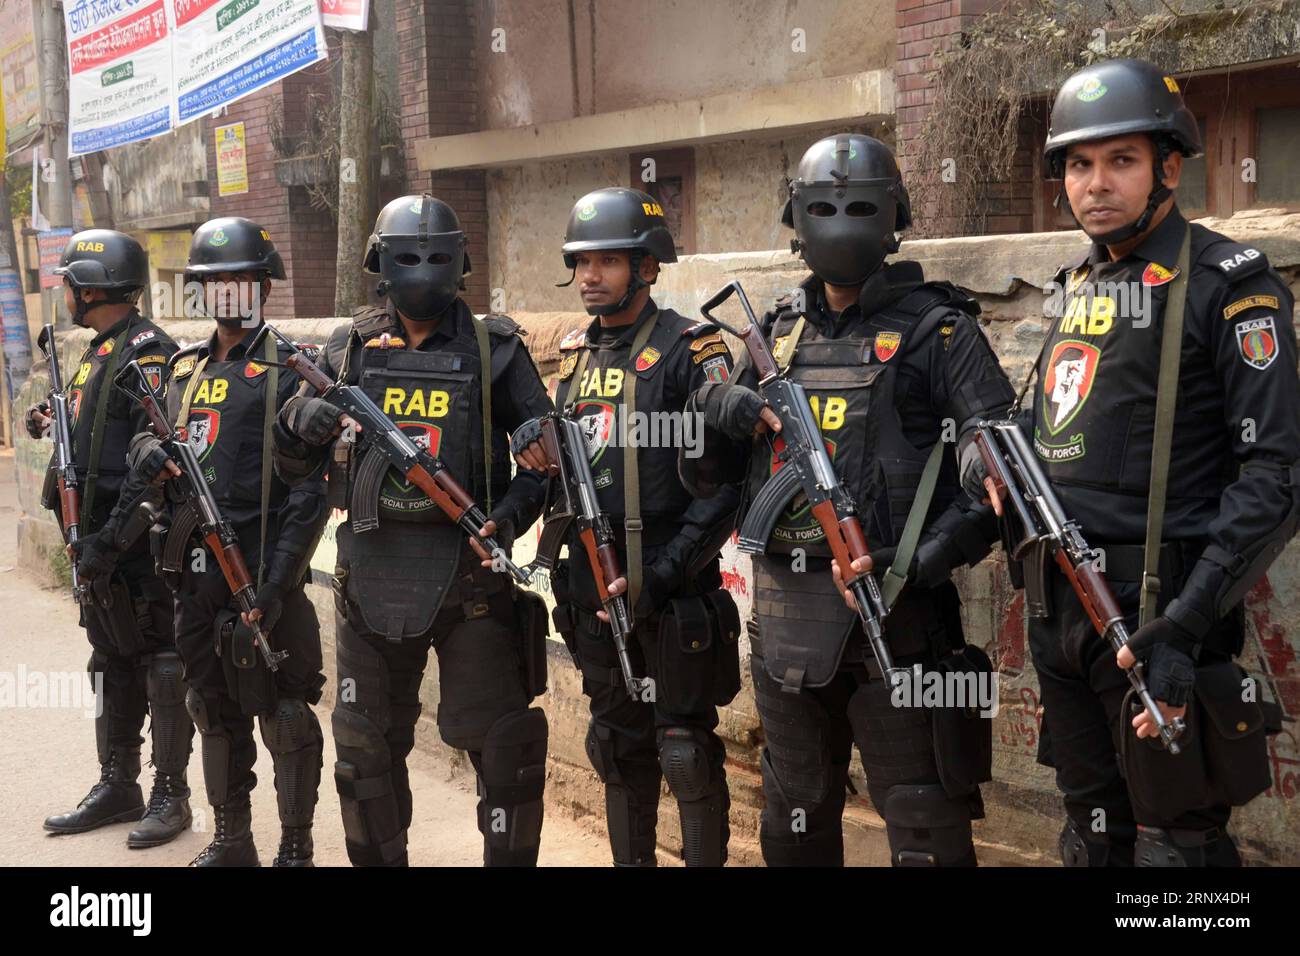 (180112) -- DHAKA, Jan. 12, 2018 -- Members of Rapid Action Battalion are seen in Dhaka, capital of Bangladesh, Jan. 12, 2018. Three militants were killed on Friday morning in a raid launched by Bangladesh s anti-crime elite force on a militant hideout near Prime Minister Sheikh Hasina s office in capital Dhaka. ) (whw) BANGLADESH-DHAKA-MILITANT-HIDEOUT-RAID Salimxreza PUBLICATIONxNOTxINxCHN Stock Photo